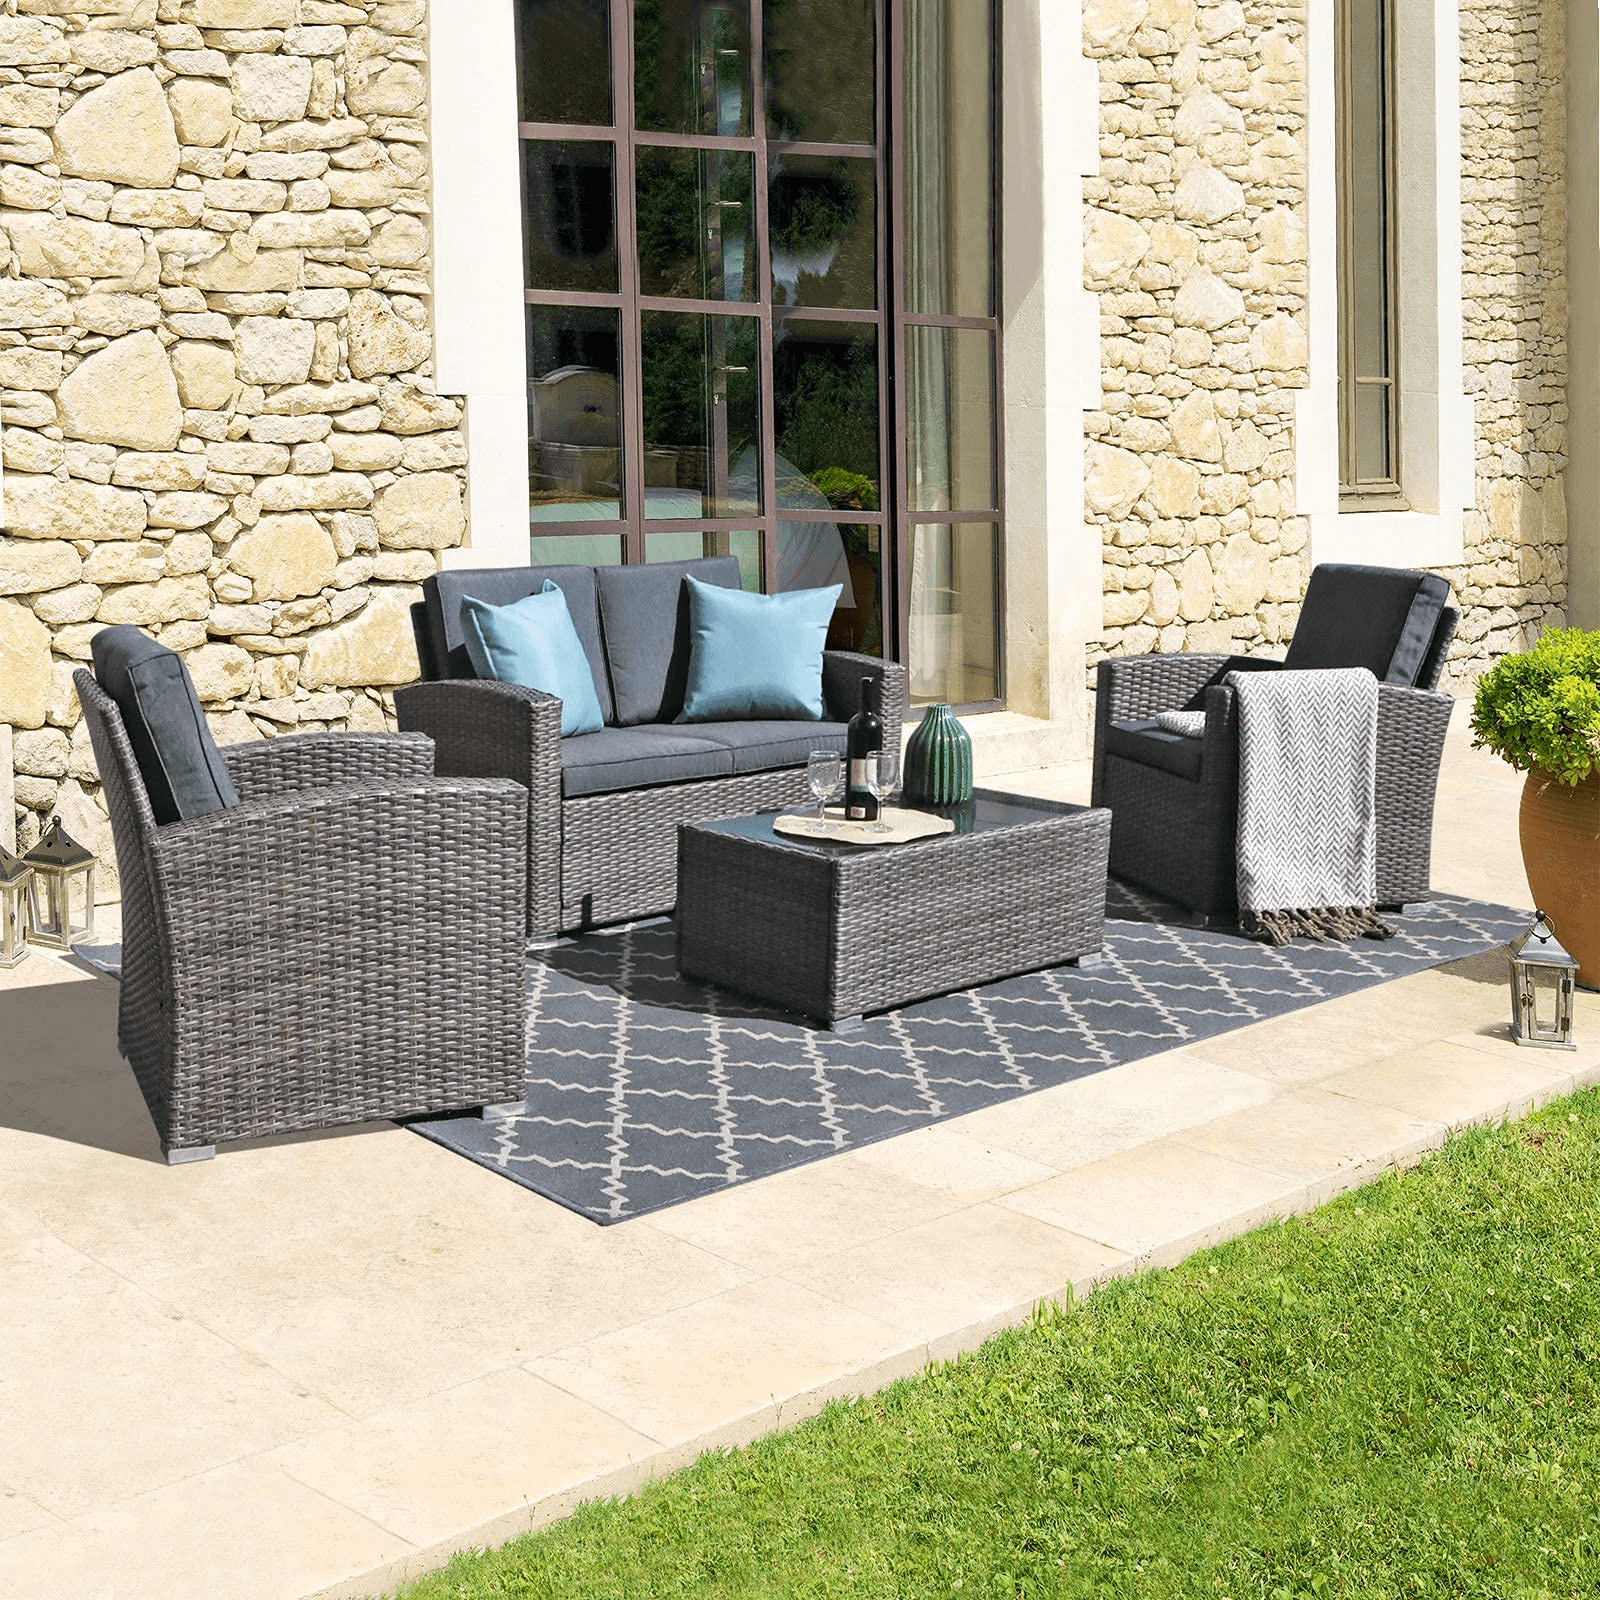 4pcs Wicker Outdoor Patio Furniture Set Small Sectional Conversation Set | Orange-Casual